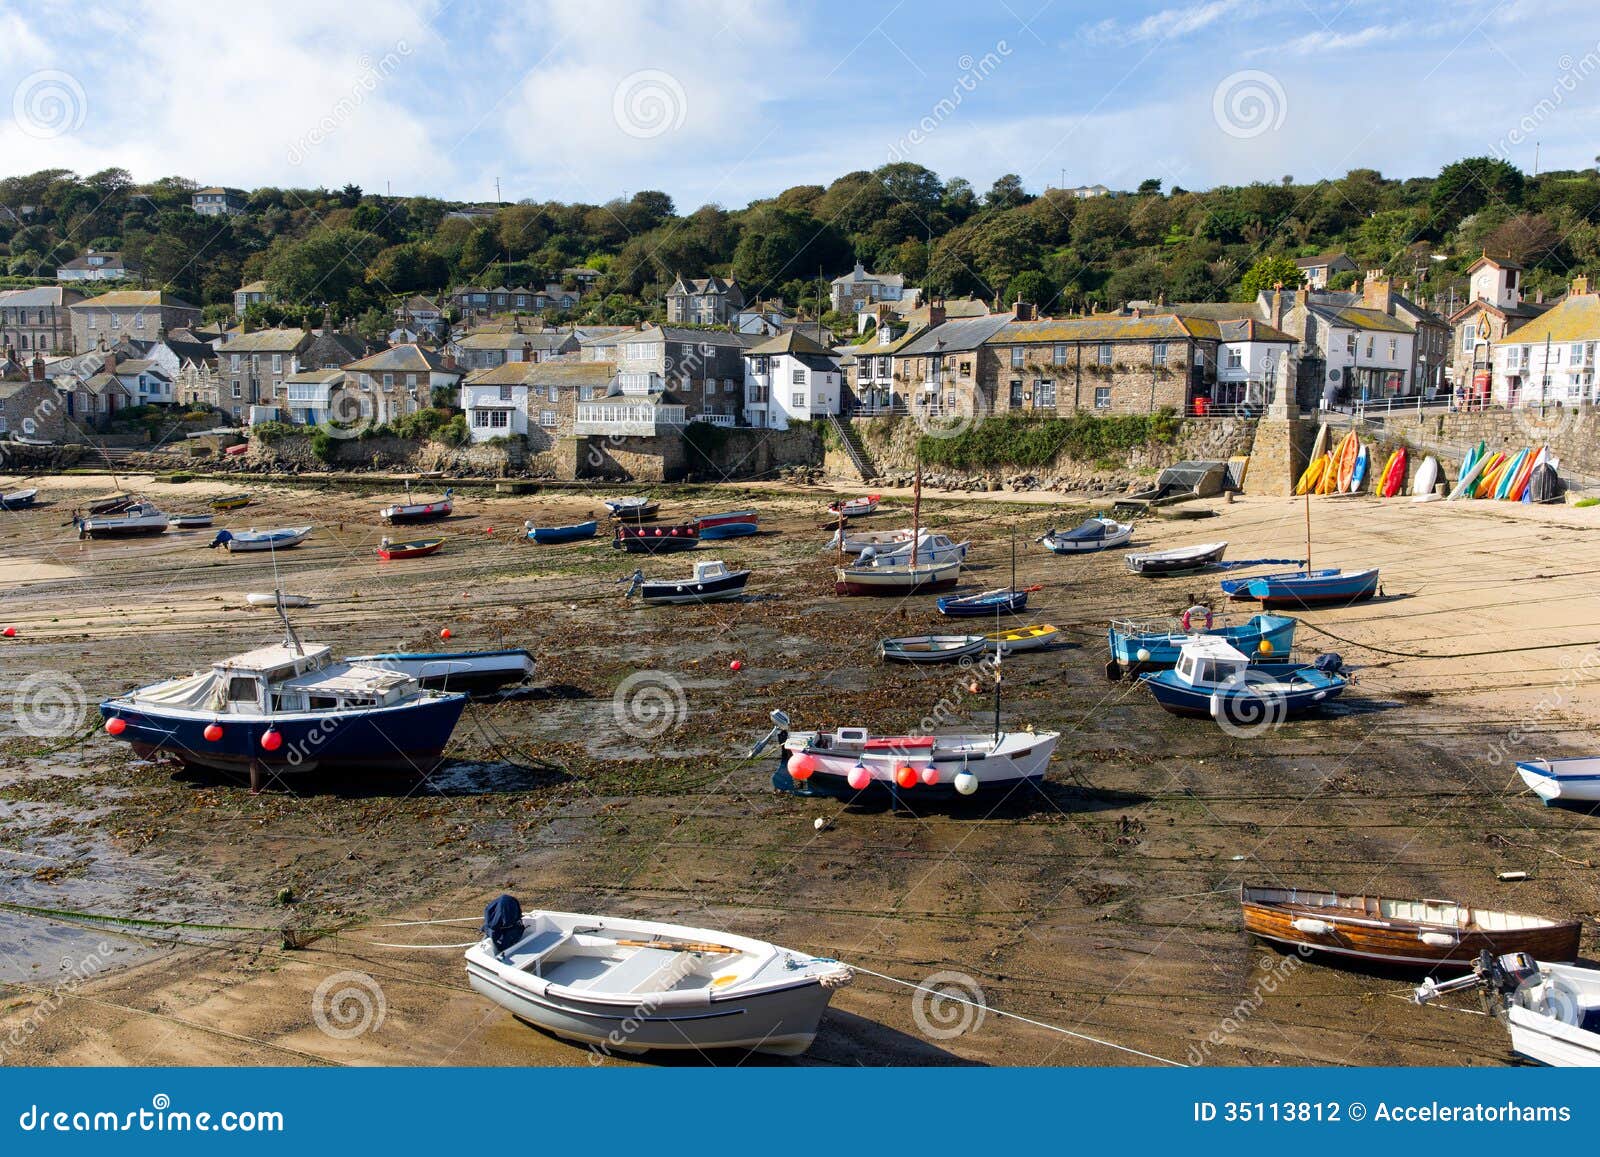 Boats In Mousehole Harbour Cornwall England At Low Tide ...